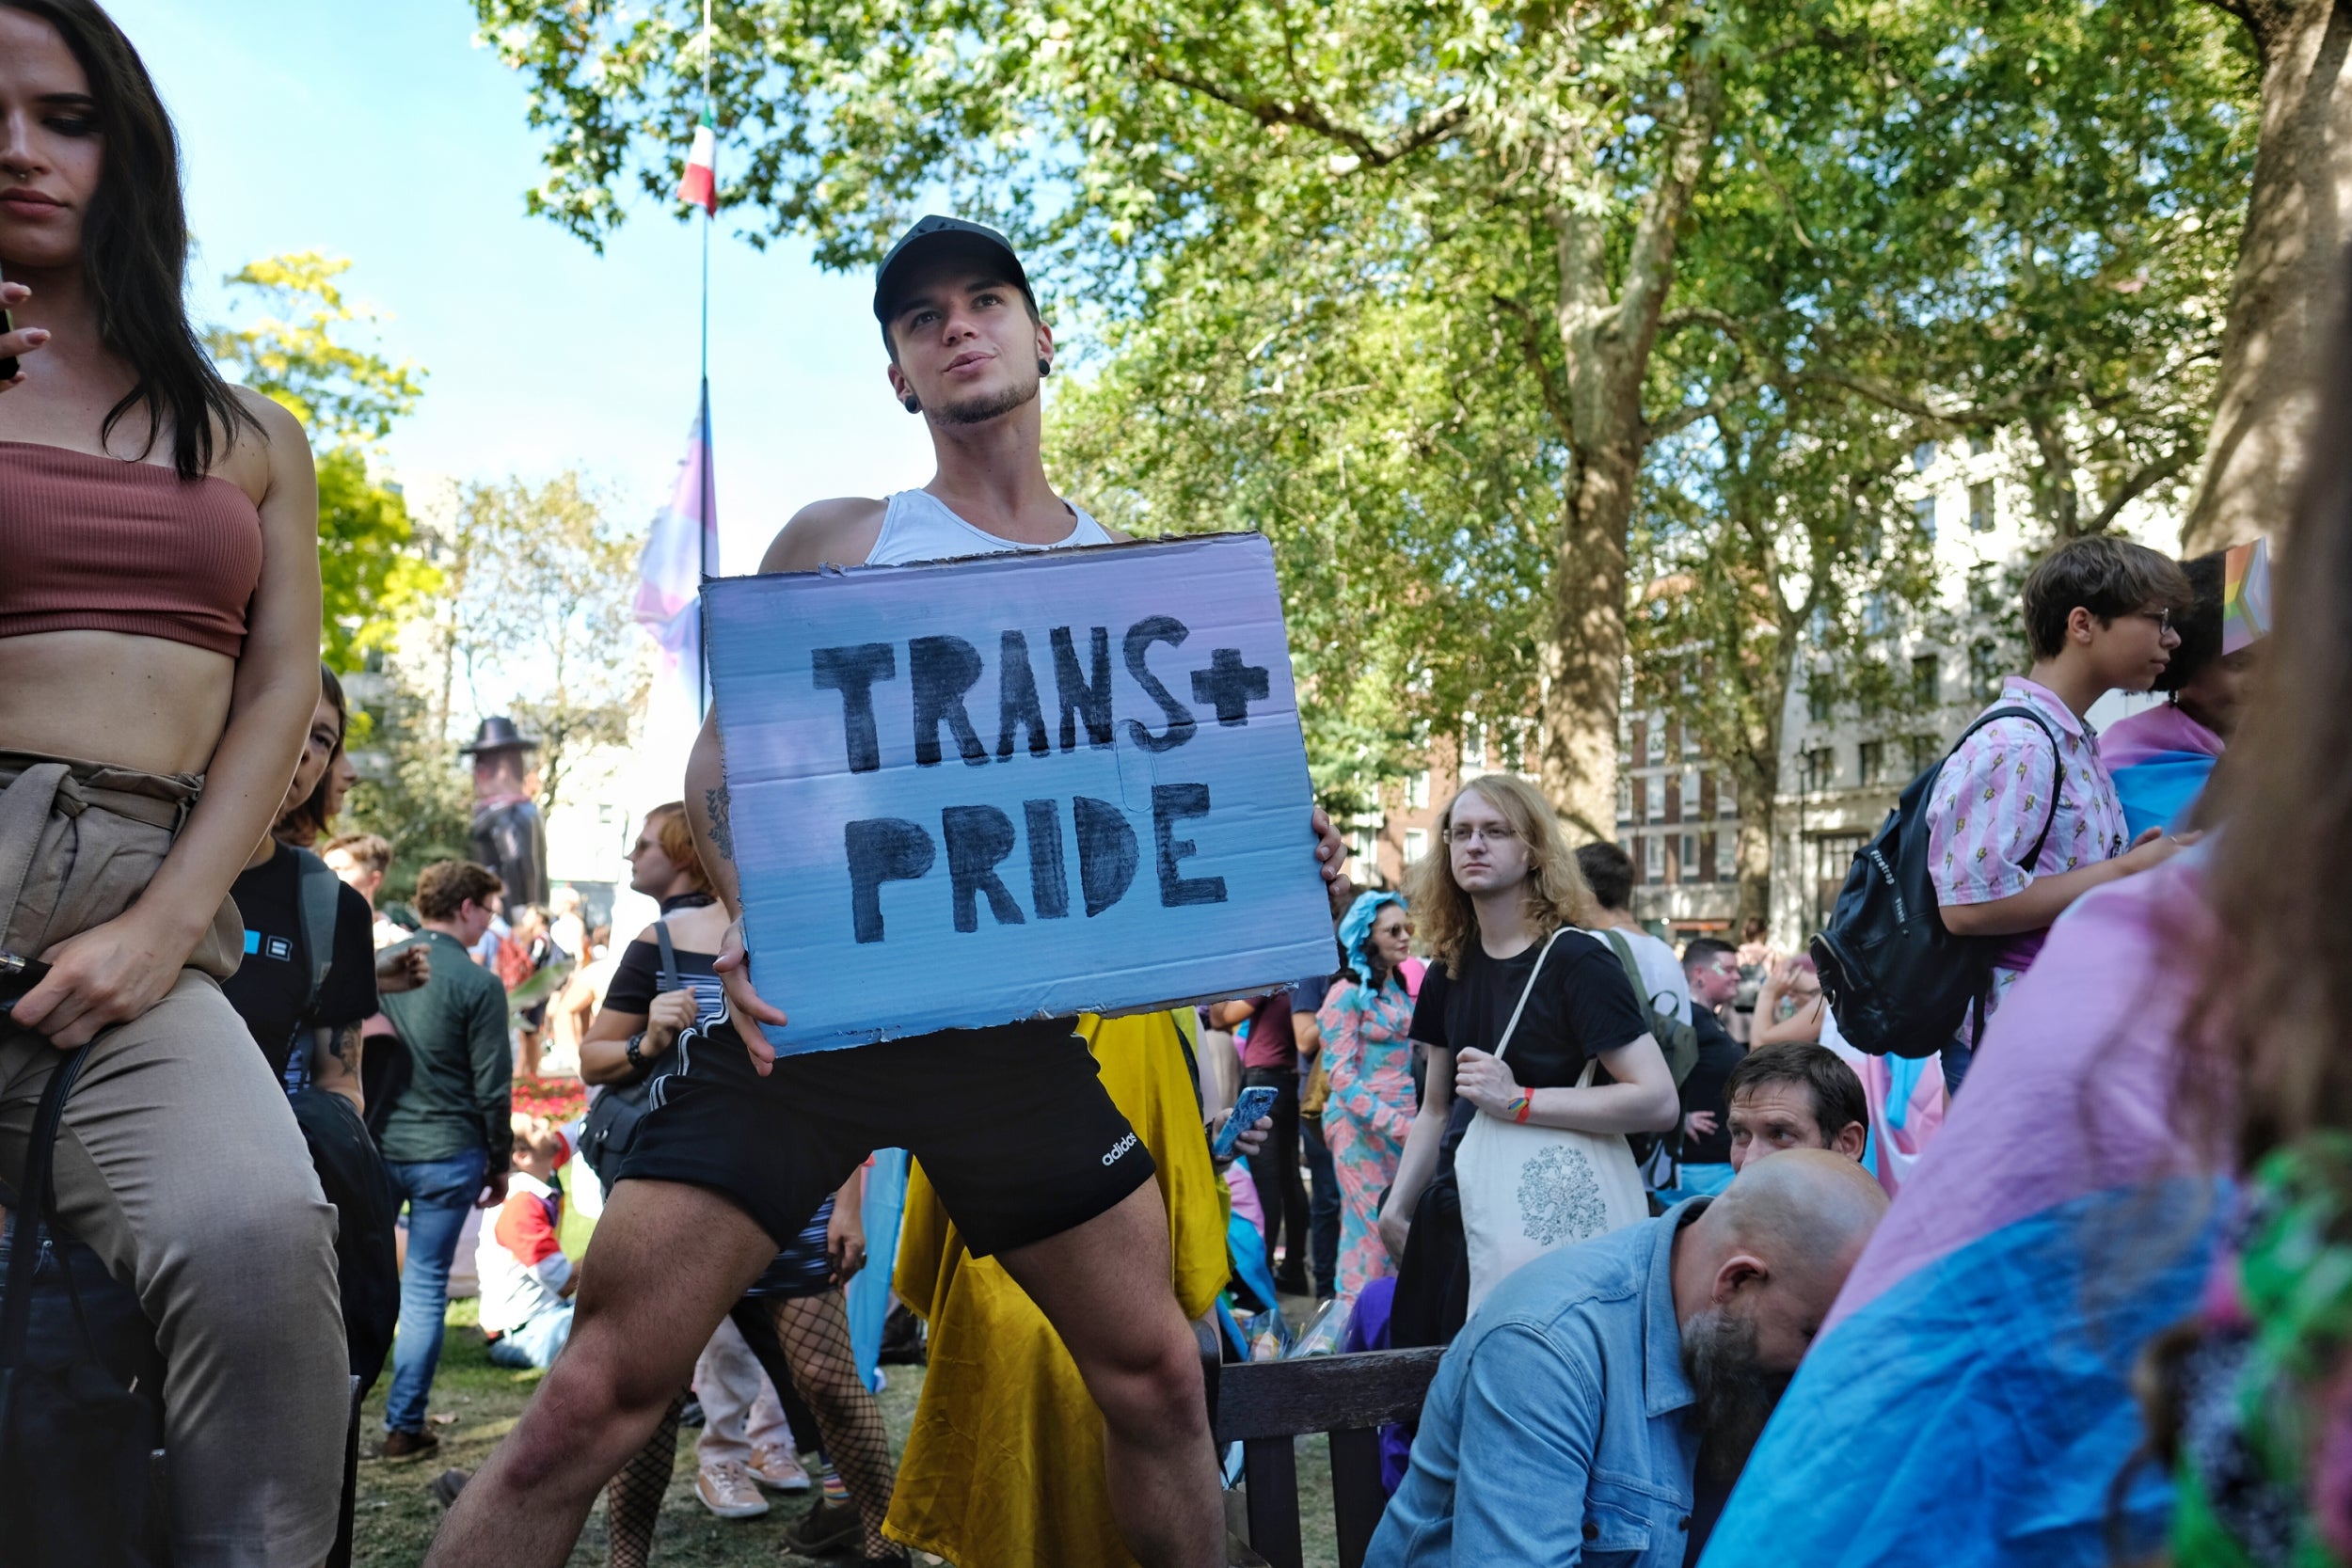 Swedish Nudist Camps - How much longer do we have to wait?' Ministers condemned over delays in  reforms to transgender rights | The Independent | The Independent